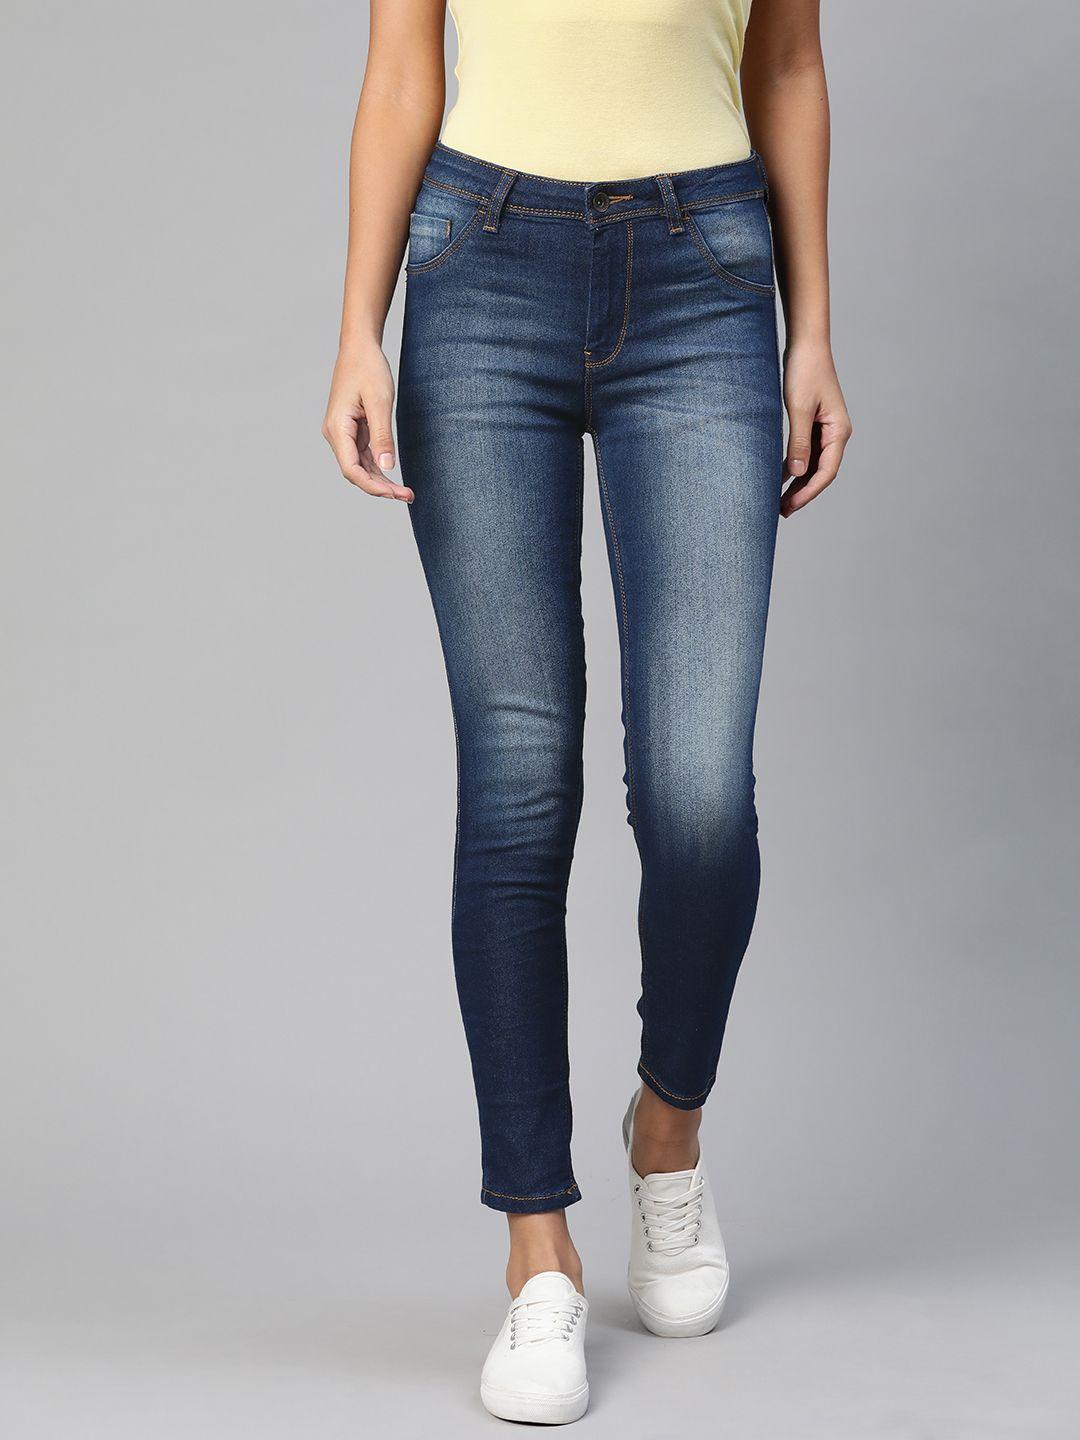 flying-machine-women-navy-blue-super-skinny-fit-high-rise-light-fade-stretchable-jeans